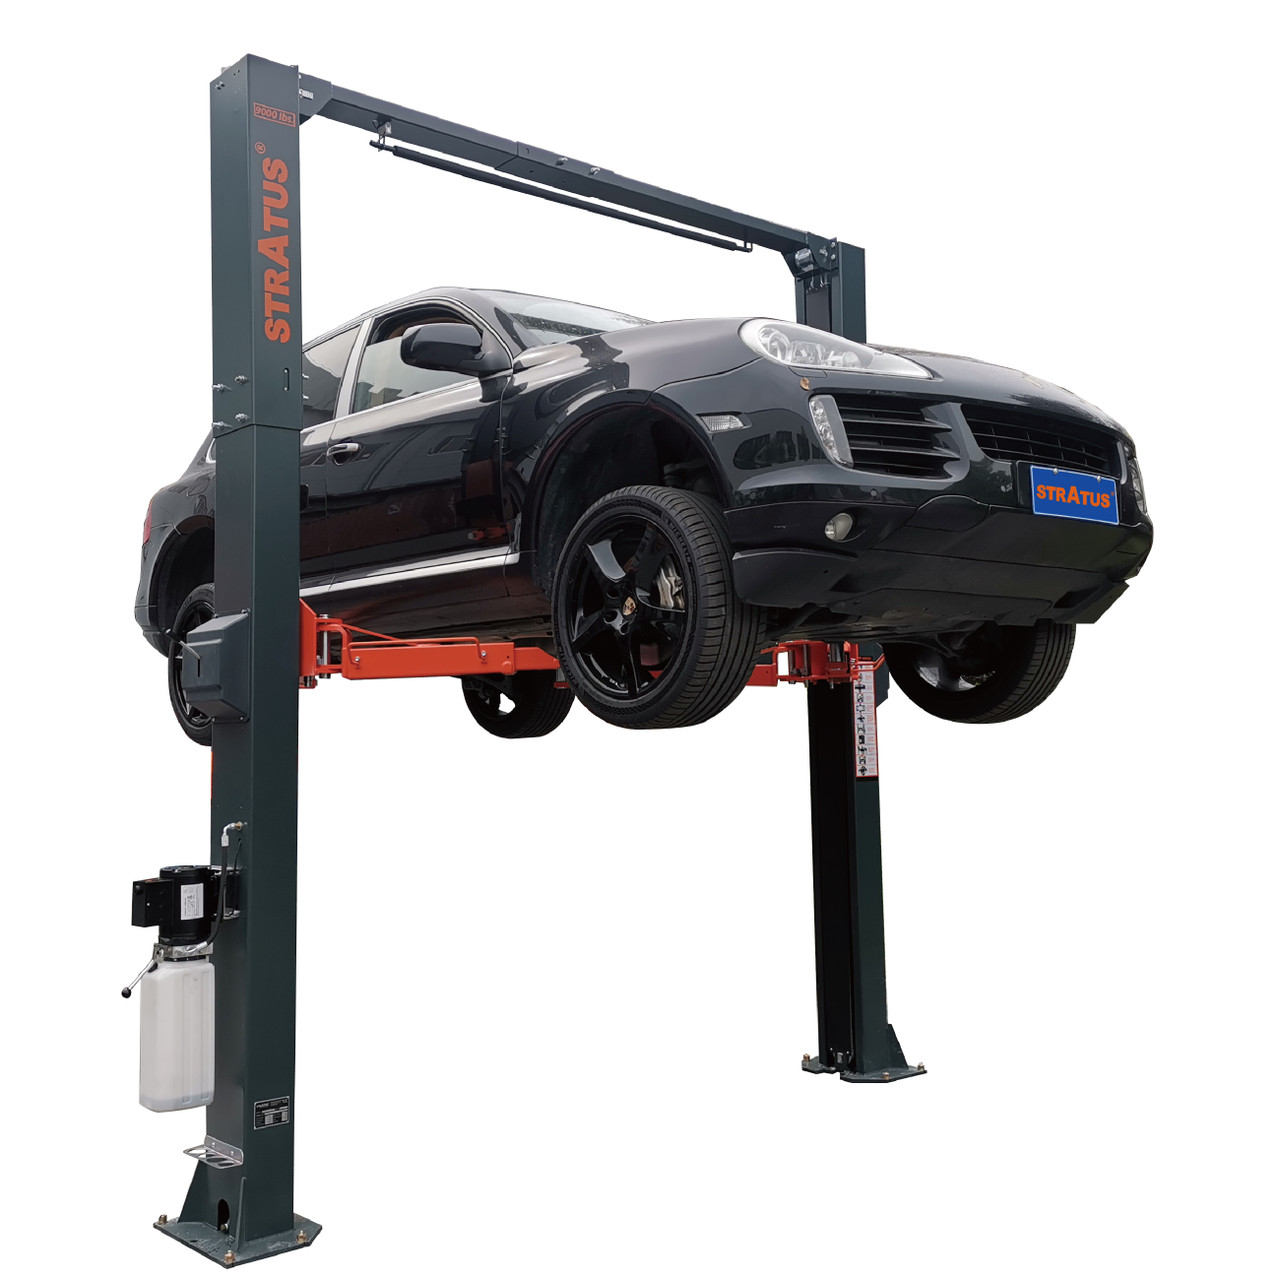 Get under your vehicle with ease using the Stratus Clear Floor Direct Drive Vehicle Lift. This neat gadget is a 2 post clear floor car lift and can comfortably handle up to an impressive 9,000 lbs capacity - ideal for large cars, trucks, and SUVs.